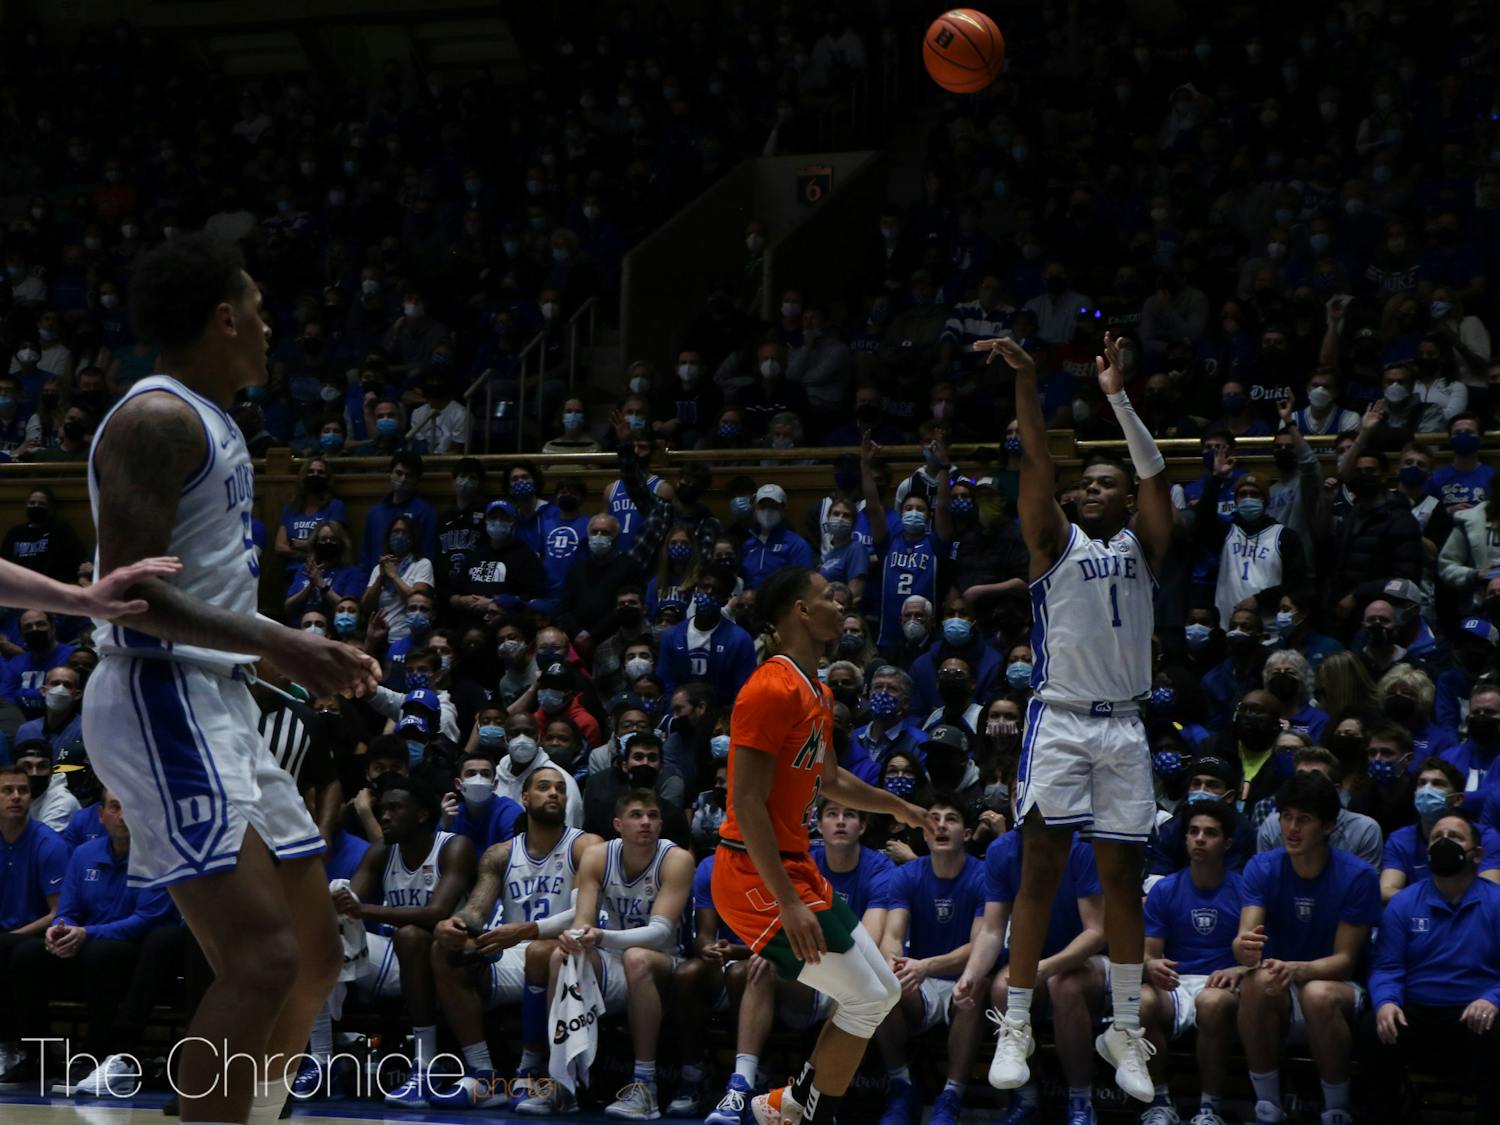 Freshman guard Trevor Keels found his stroke from downtown early, hitting two threes in the first half. 